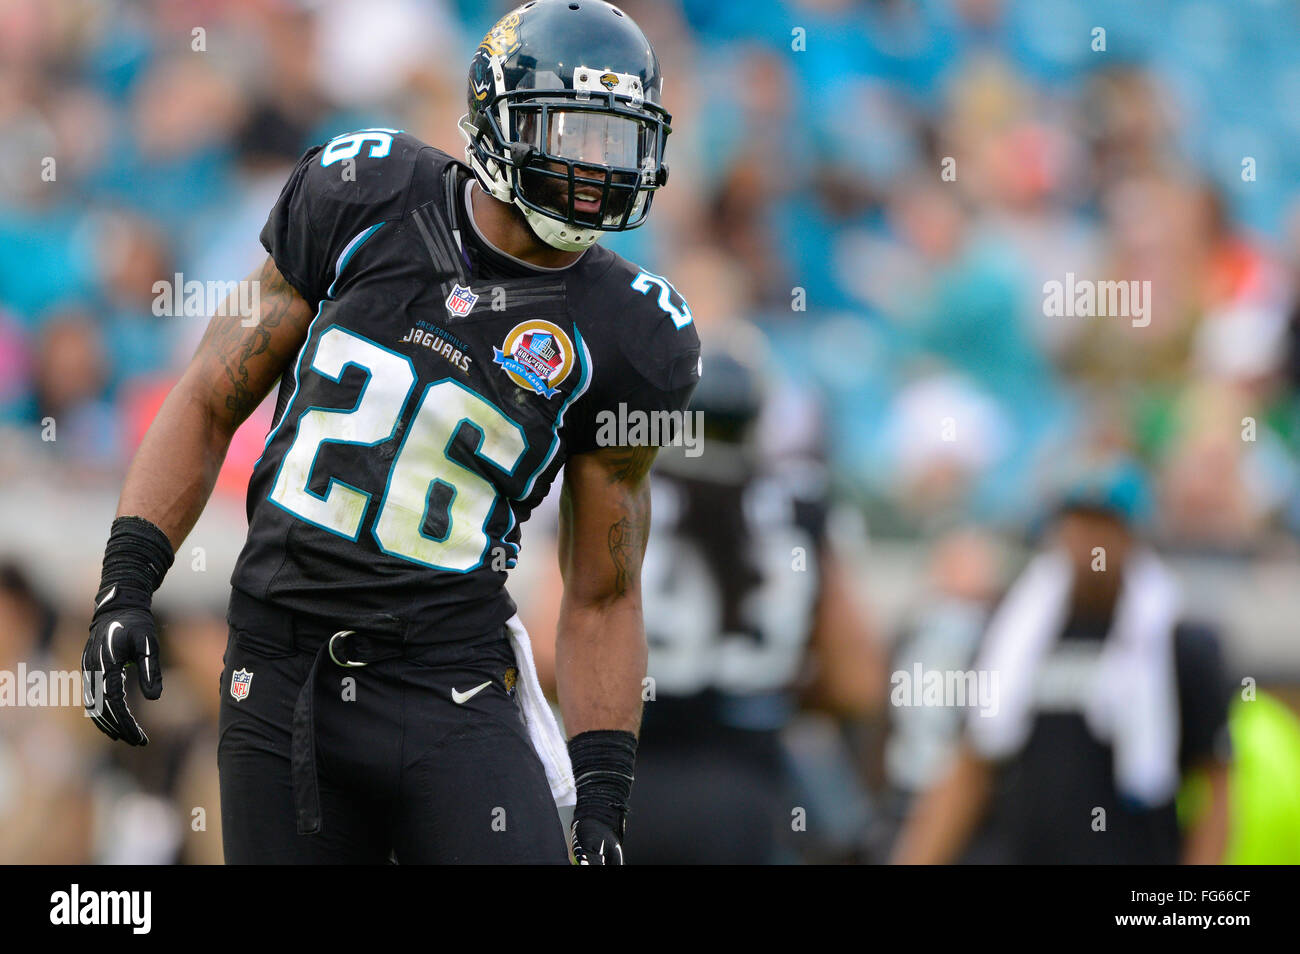 Dec. 9, 2012 - Jacksonville, FL, USA - Jacksonville Jaguars strong safety Dawan Landry (26) during an NFL game against the New York Jets at EverBank Field on Dec 9, 2012 in Jacksonville, Florida. The Jets won 17-10...ZUMA Press/Scott A. Miller. (Credit Image: © Scott A. Miller via ZUMA Wire) Stock Photo